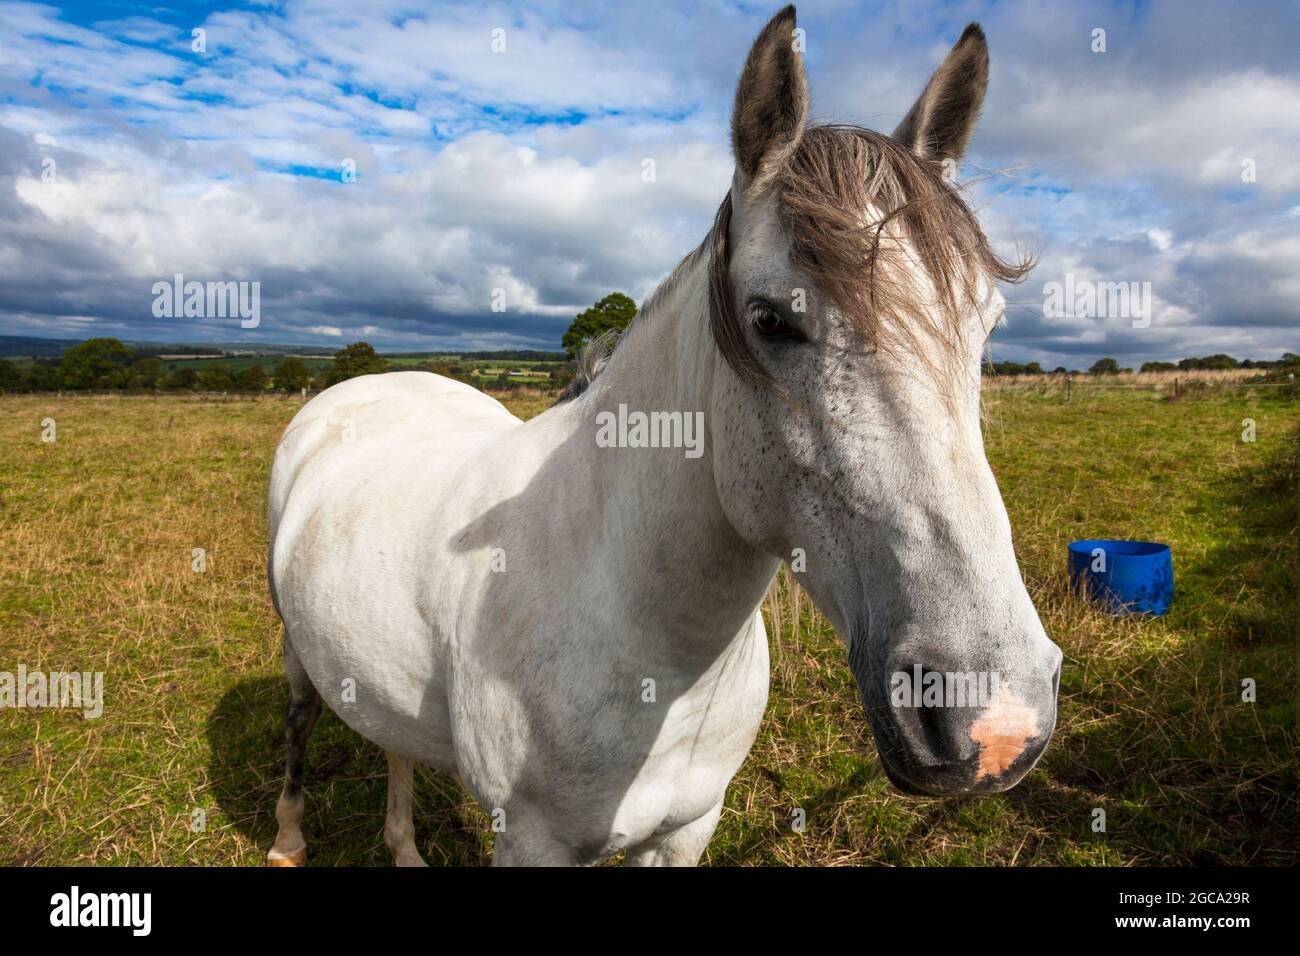 A white horse in a paddock in rural England, U.K. Stock Photo